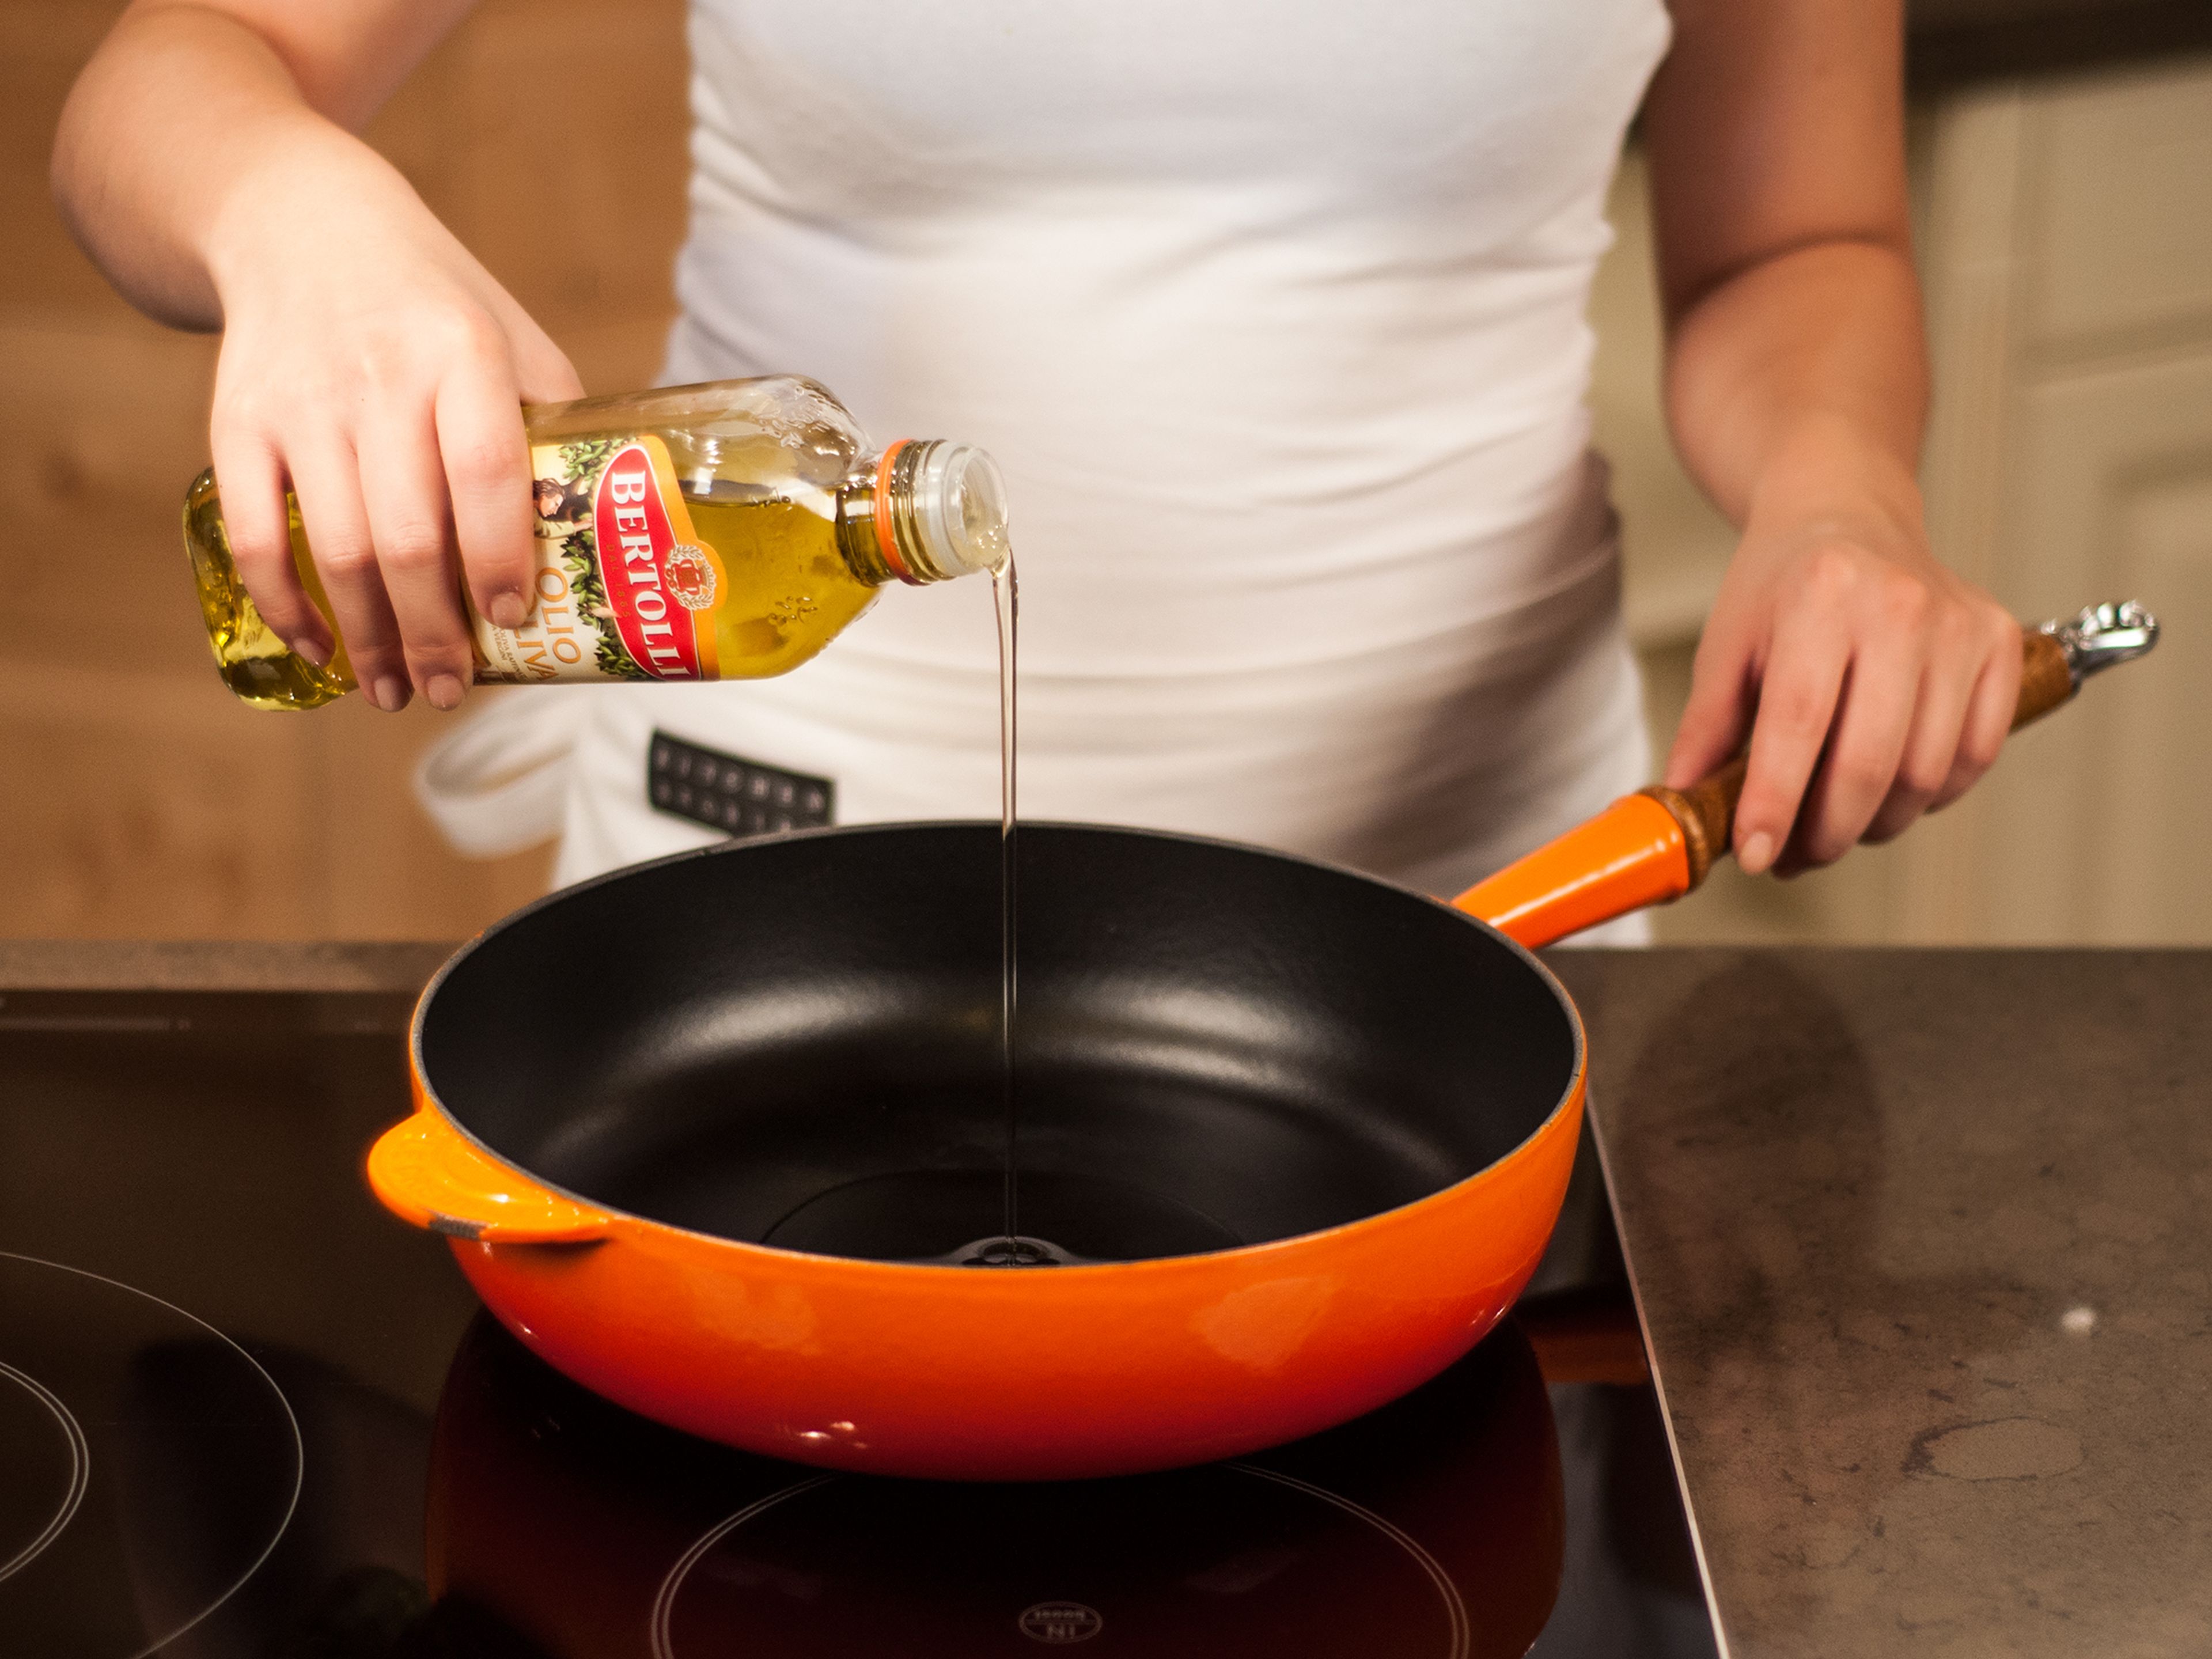 Add a generous amount oil to frying pan and heat over medium-high heat.